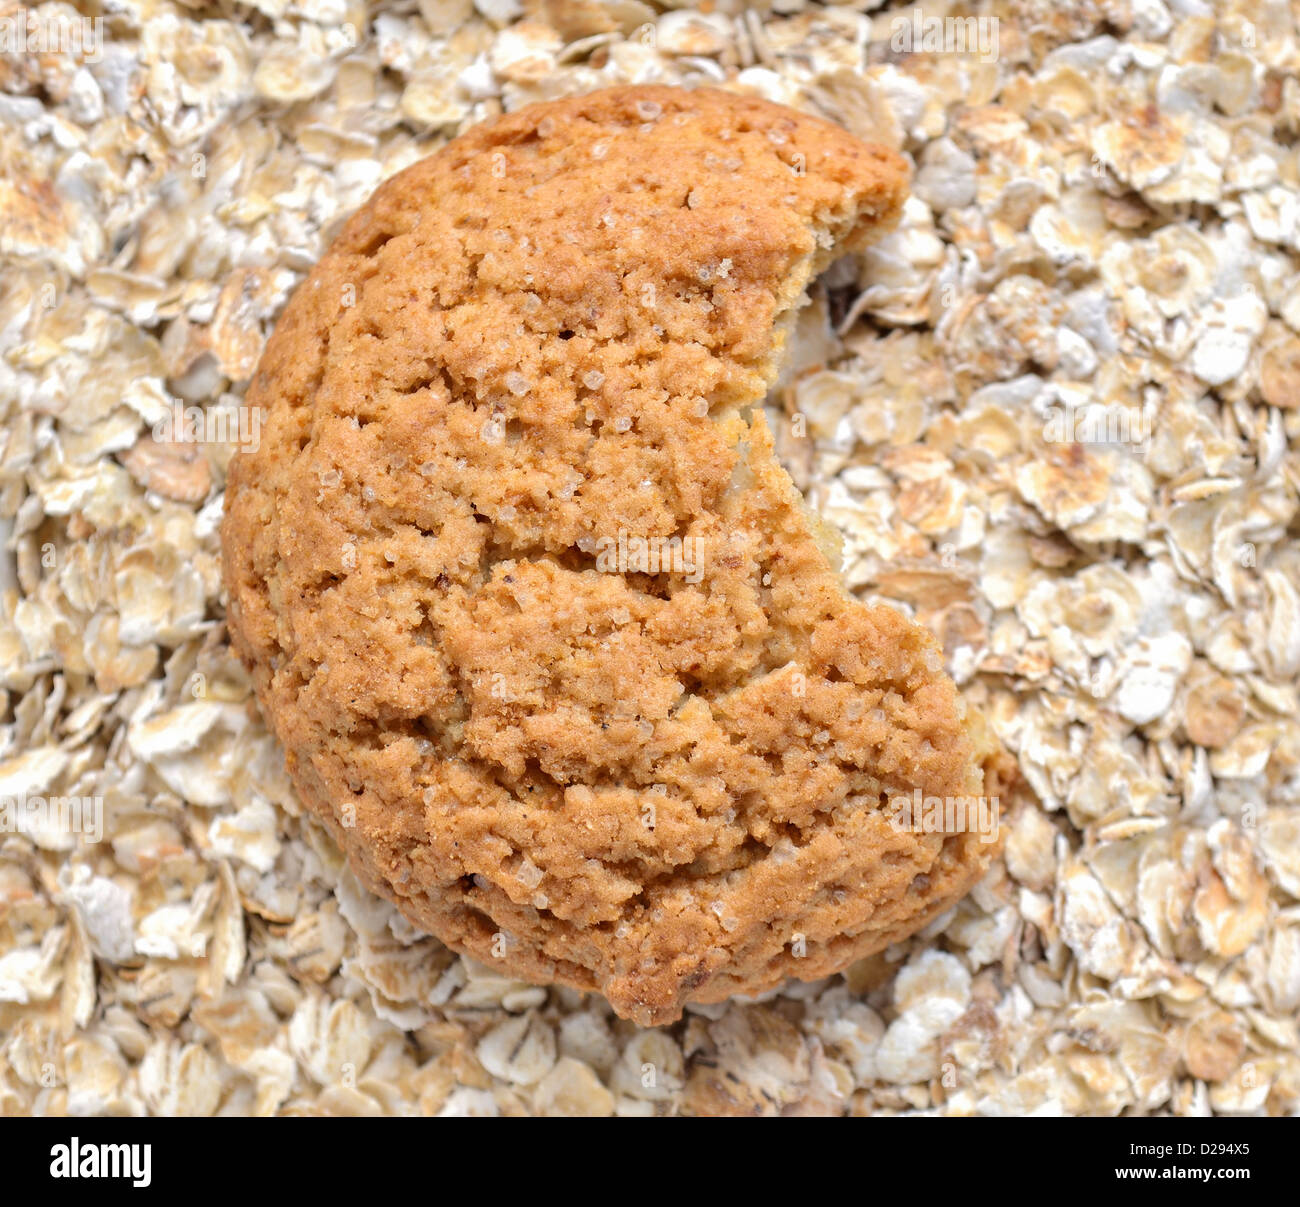 bitten oat cookie over oat flakes background Stock Photo